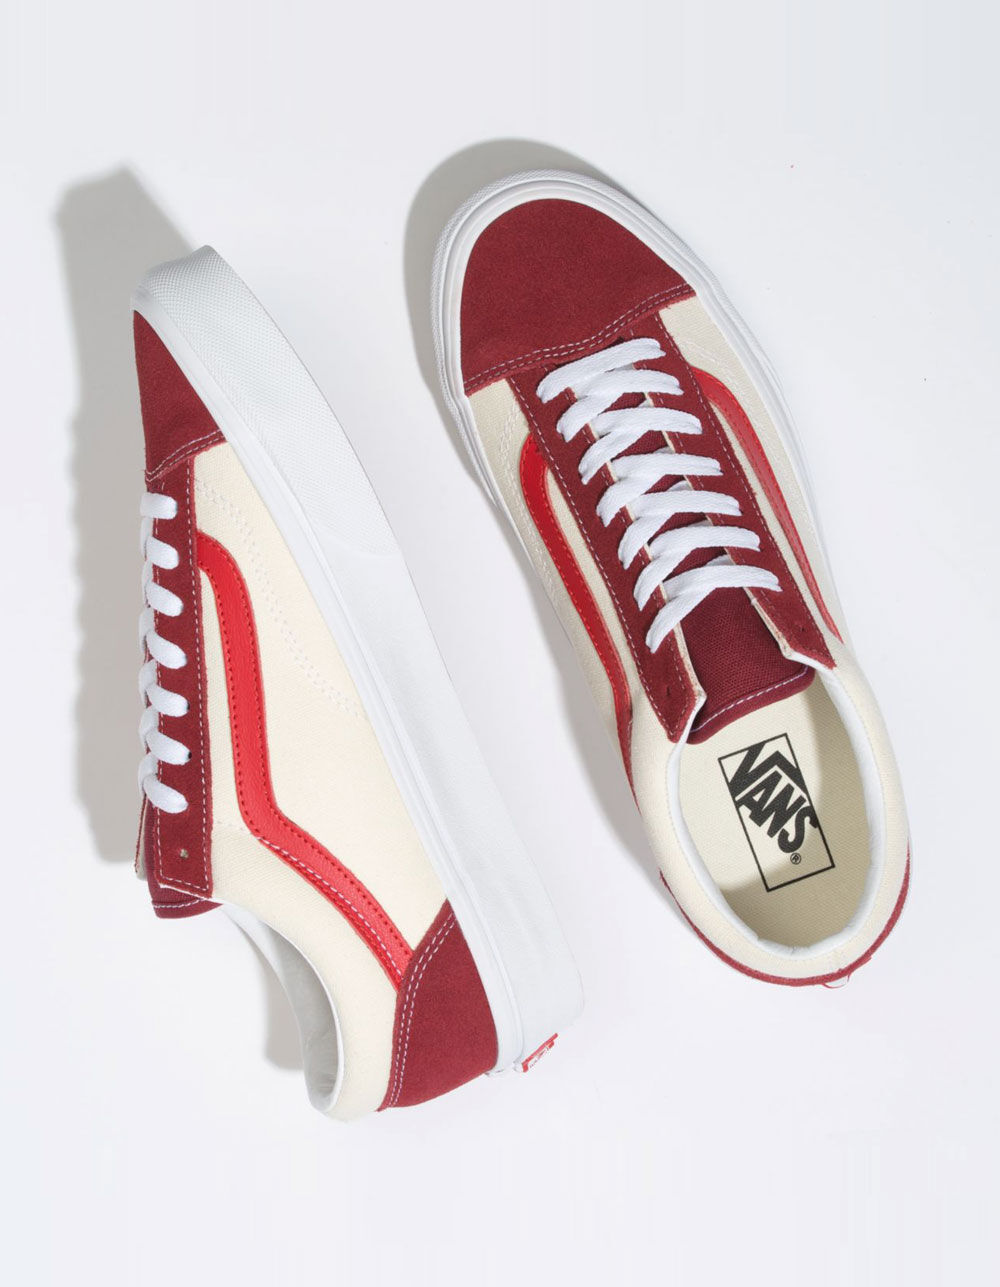 VANS Retro Sport Style 36 Biking Red & Poinsettia Shoes image number 2